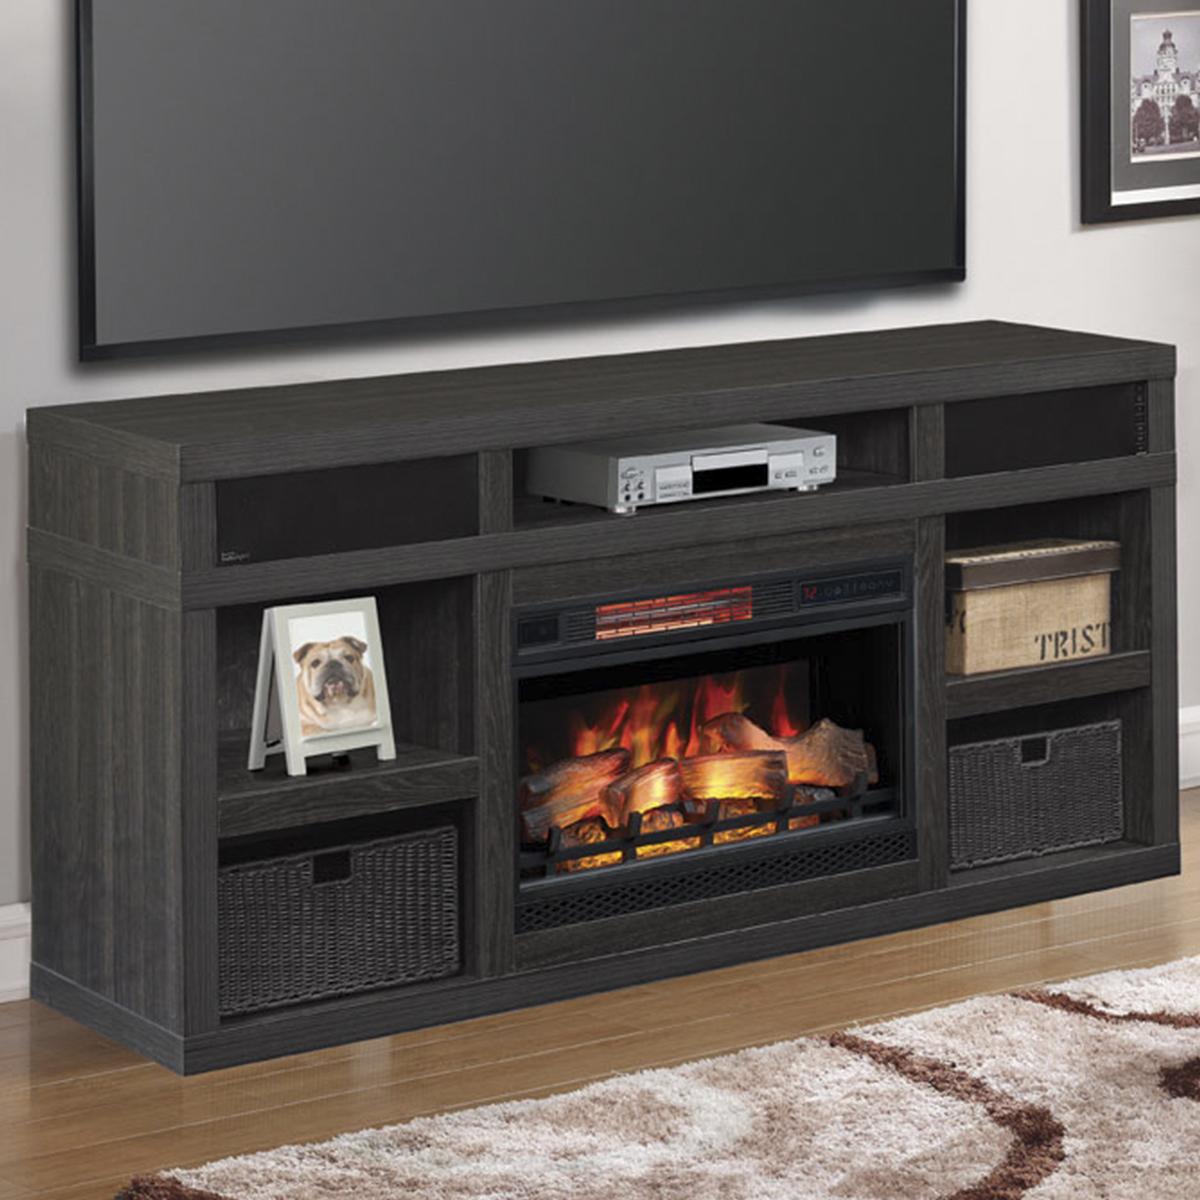 Fireplace Media Cabinet Awesome Fabio Flames Greatlin 64" Tv Stand In Black Walnut